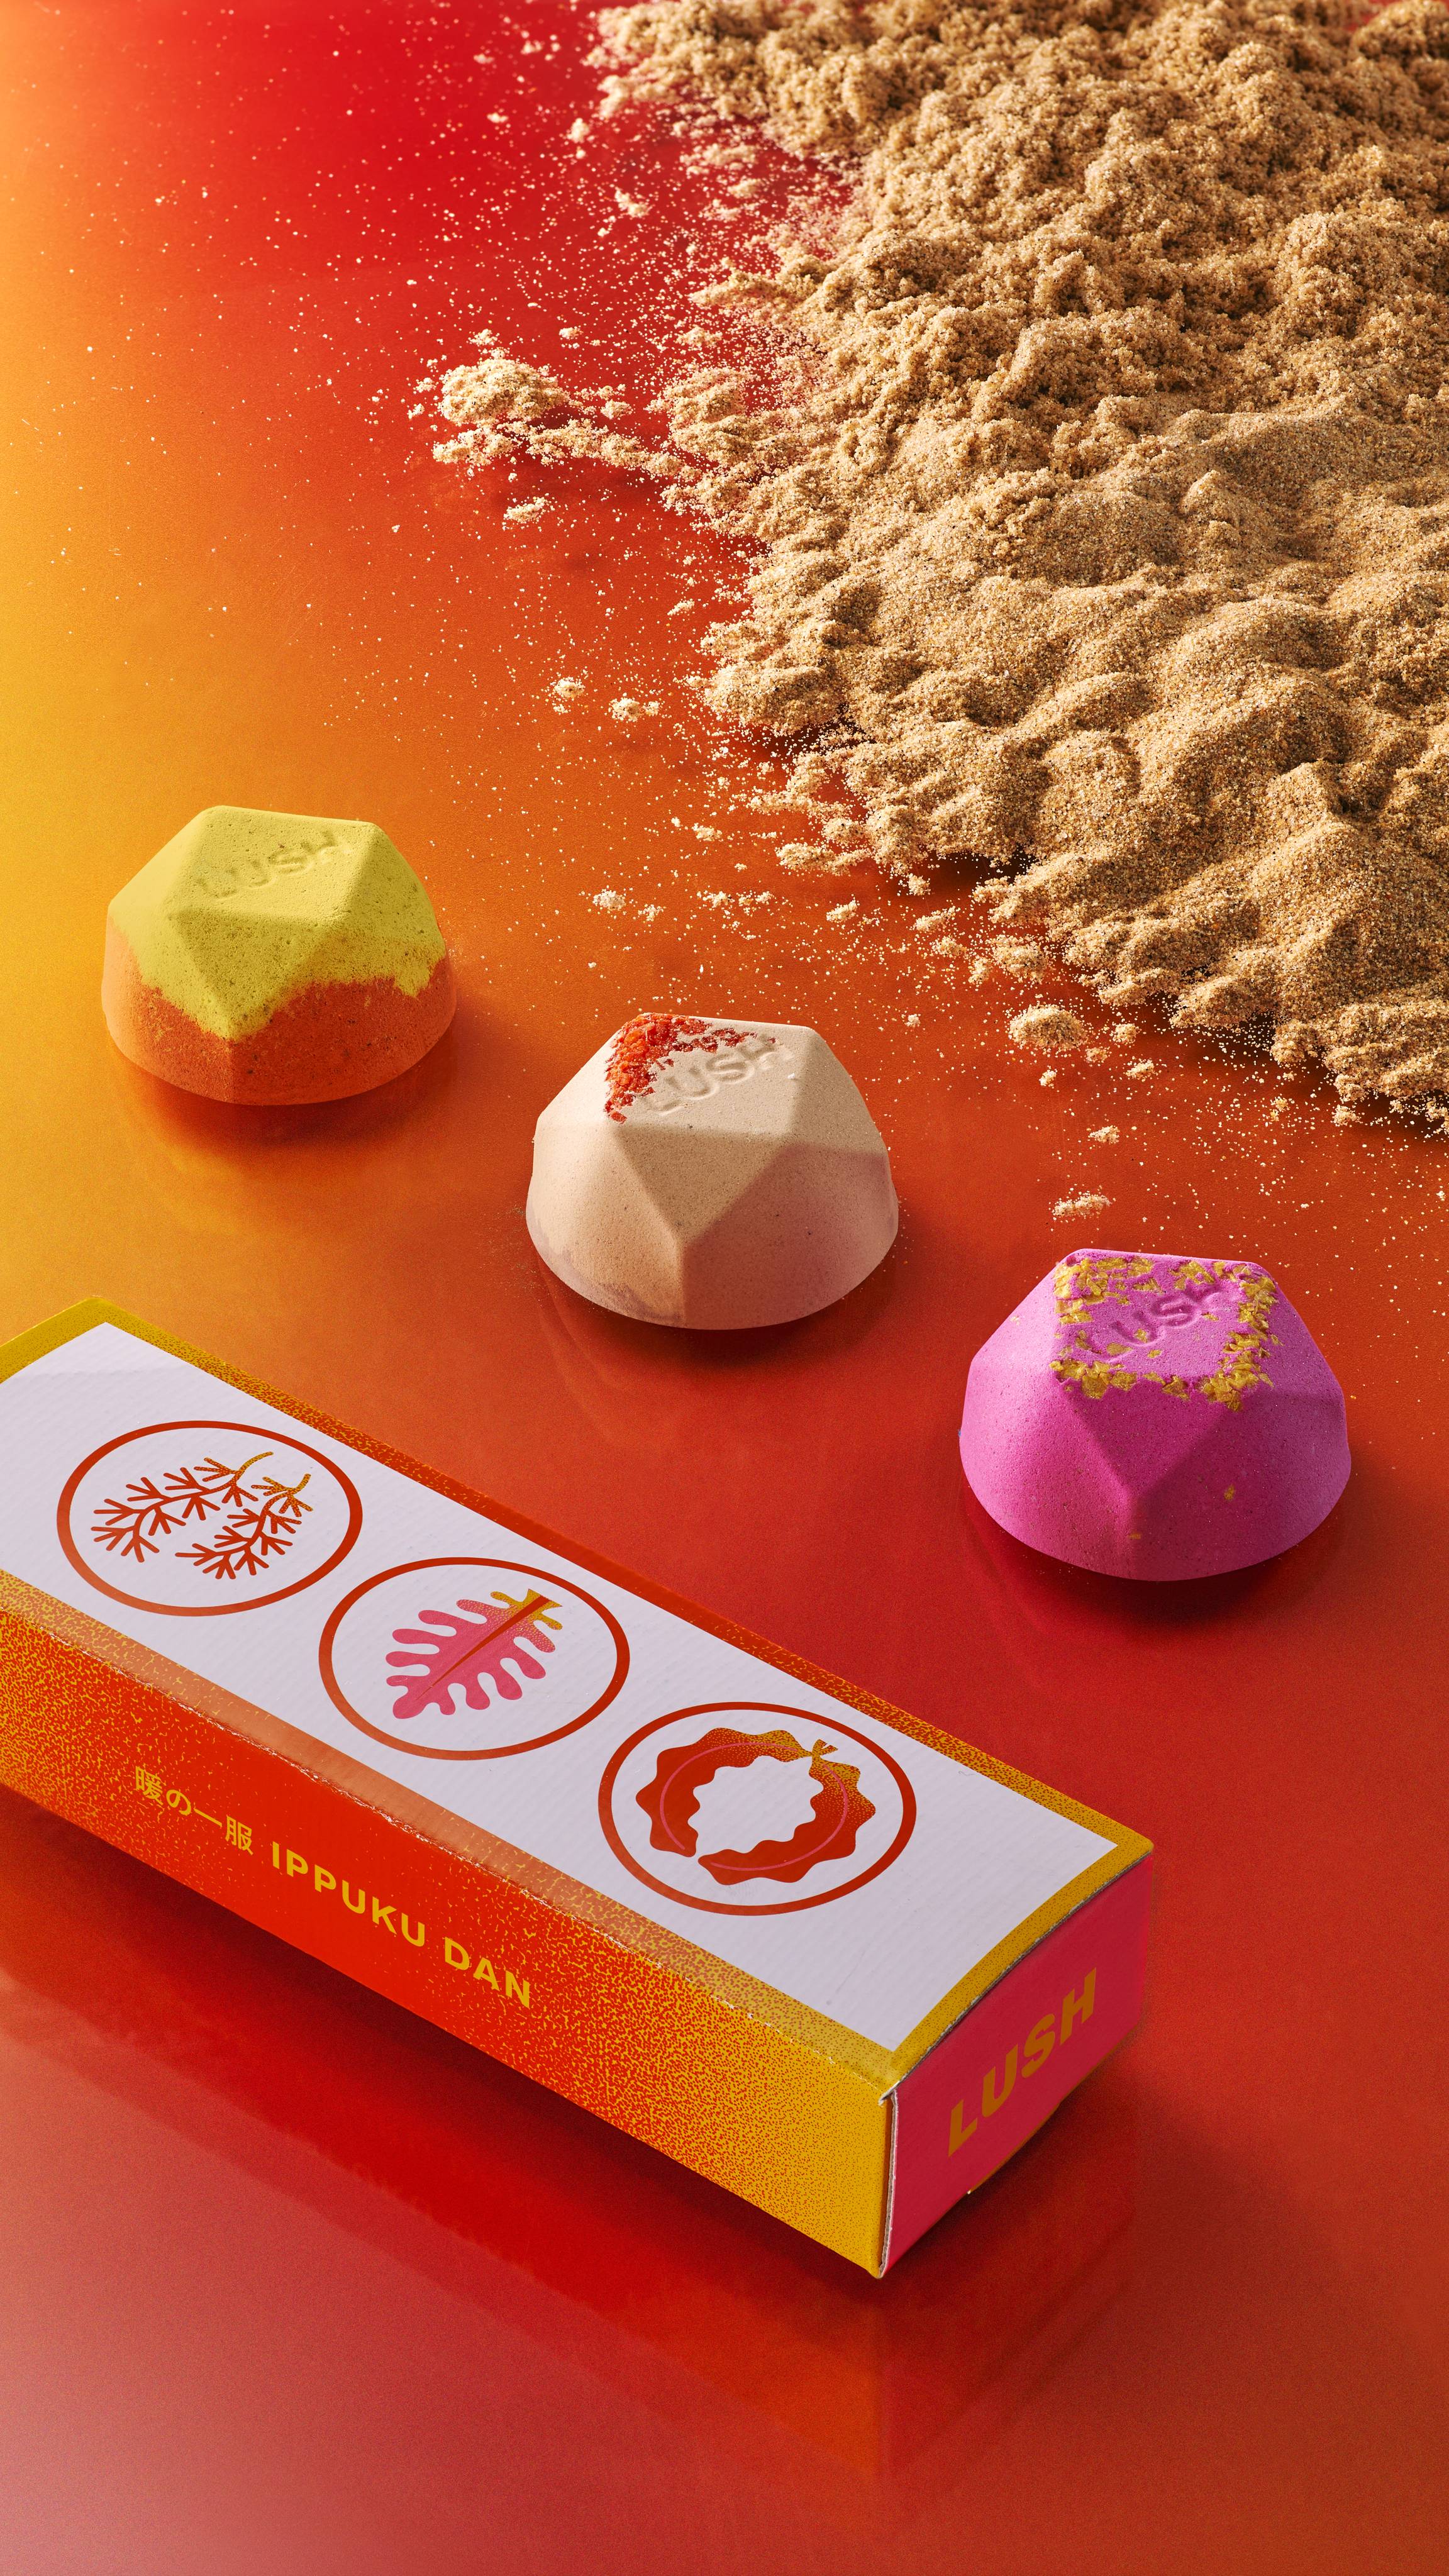 Three ippuku warming bath bombs lay in a line with sand on one side, the box on another on top of an orange-yellow gradient.